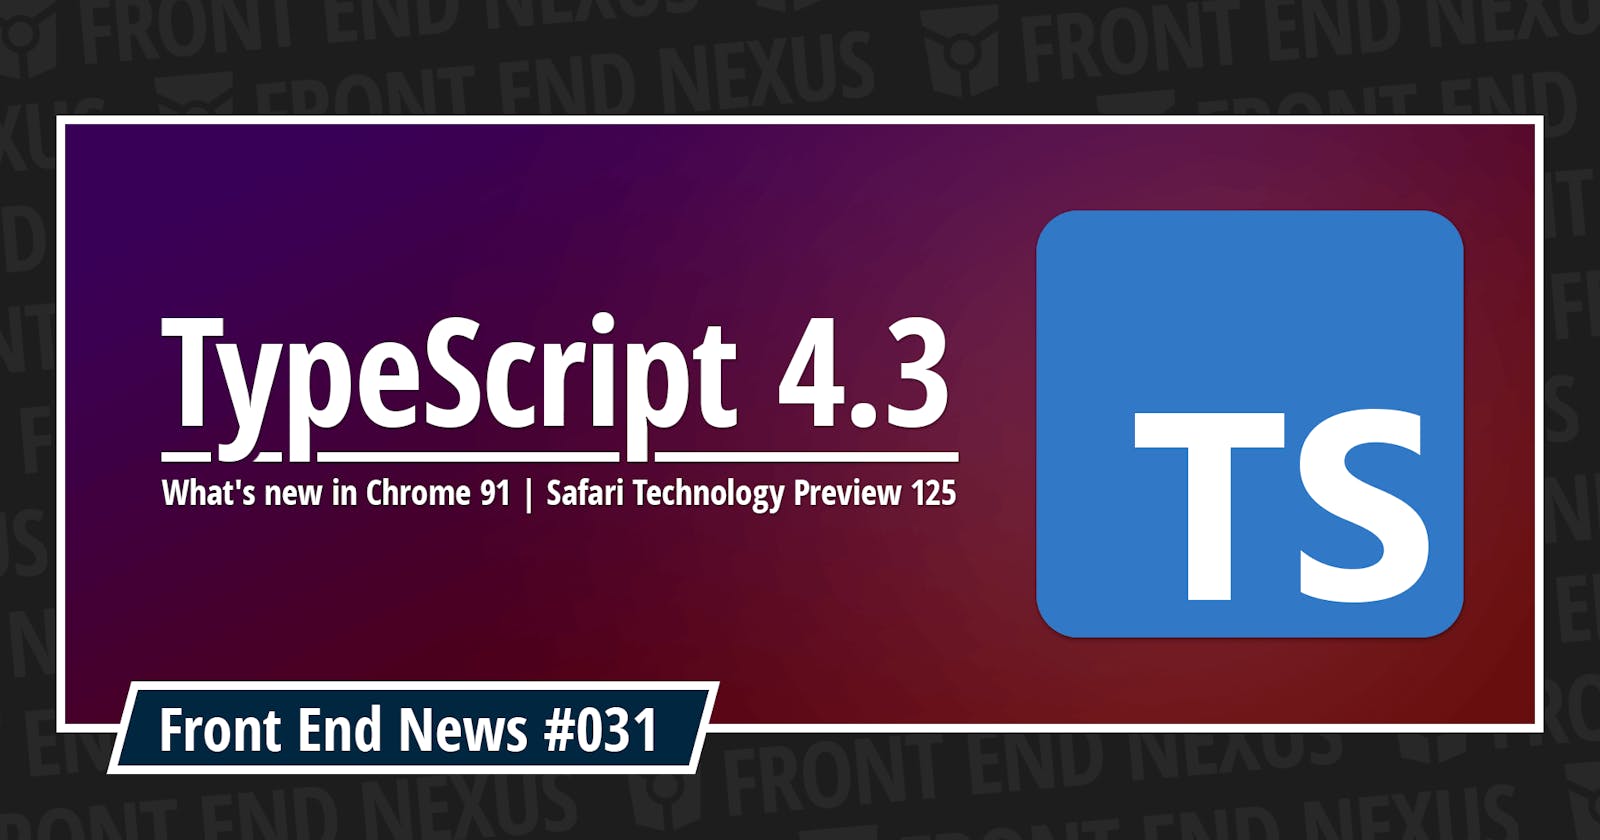 Introducing TypeScript 4.3, what's new in Chrome 91 and Safari Technology Preview 125 | Front End News #031